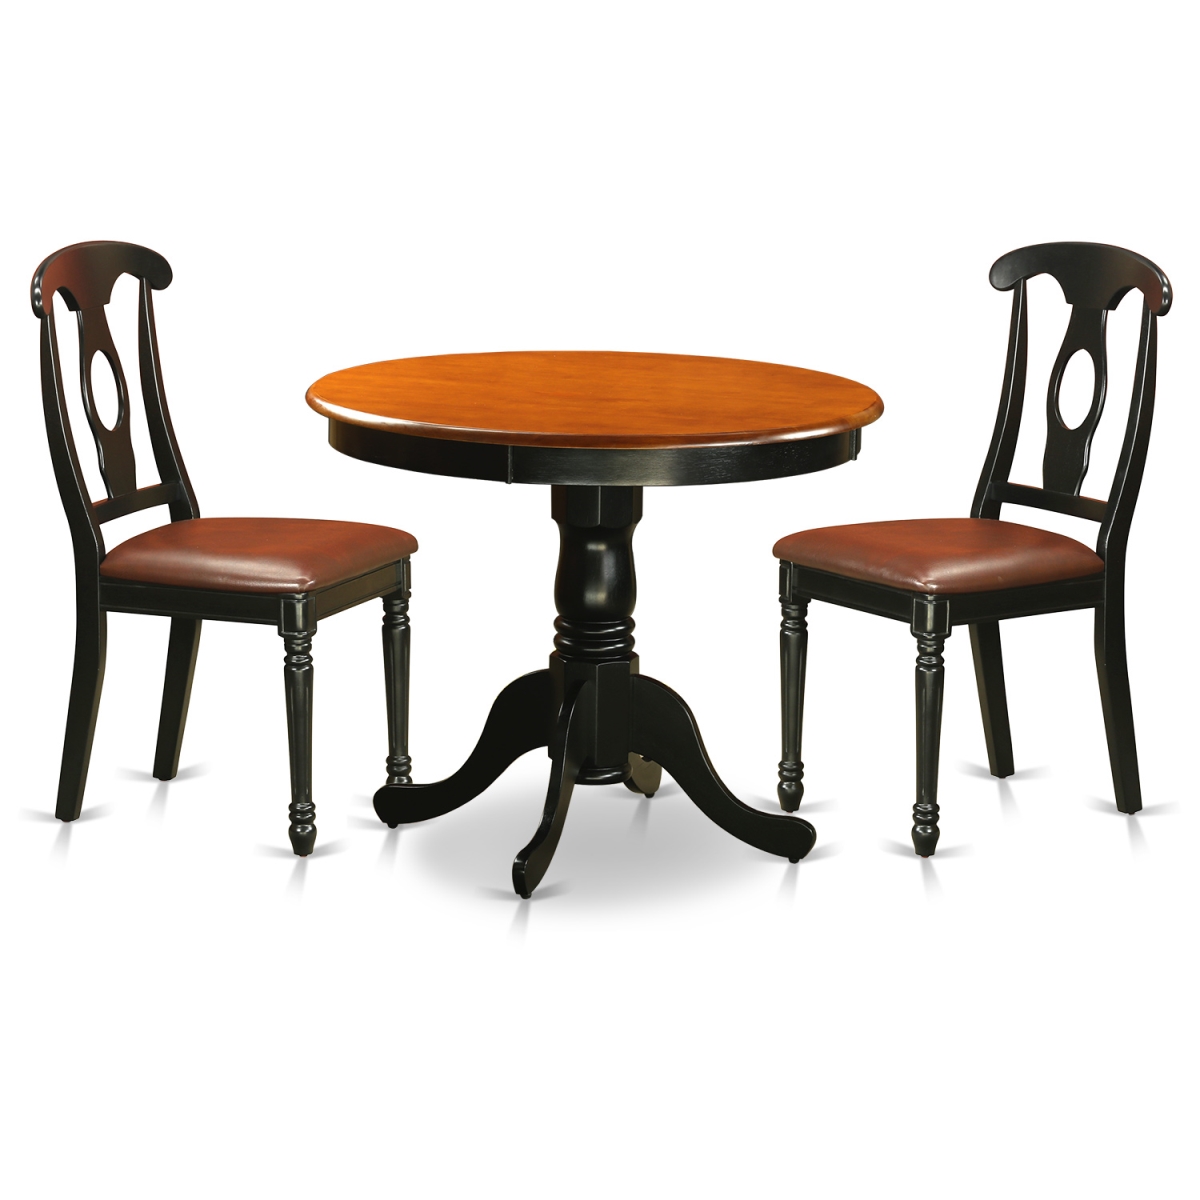 Picture of East West Furniture ANKE3-BLK-LC Dining Room Set with 2 Faux Leather Chairs, Black & Cherry - 3 Piece